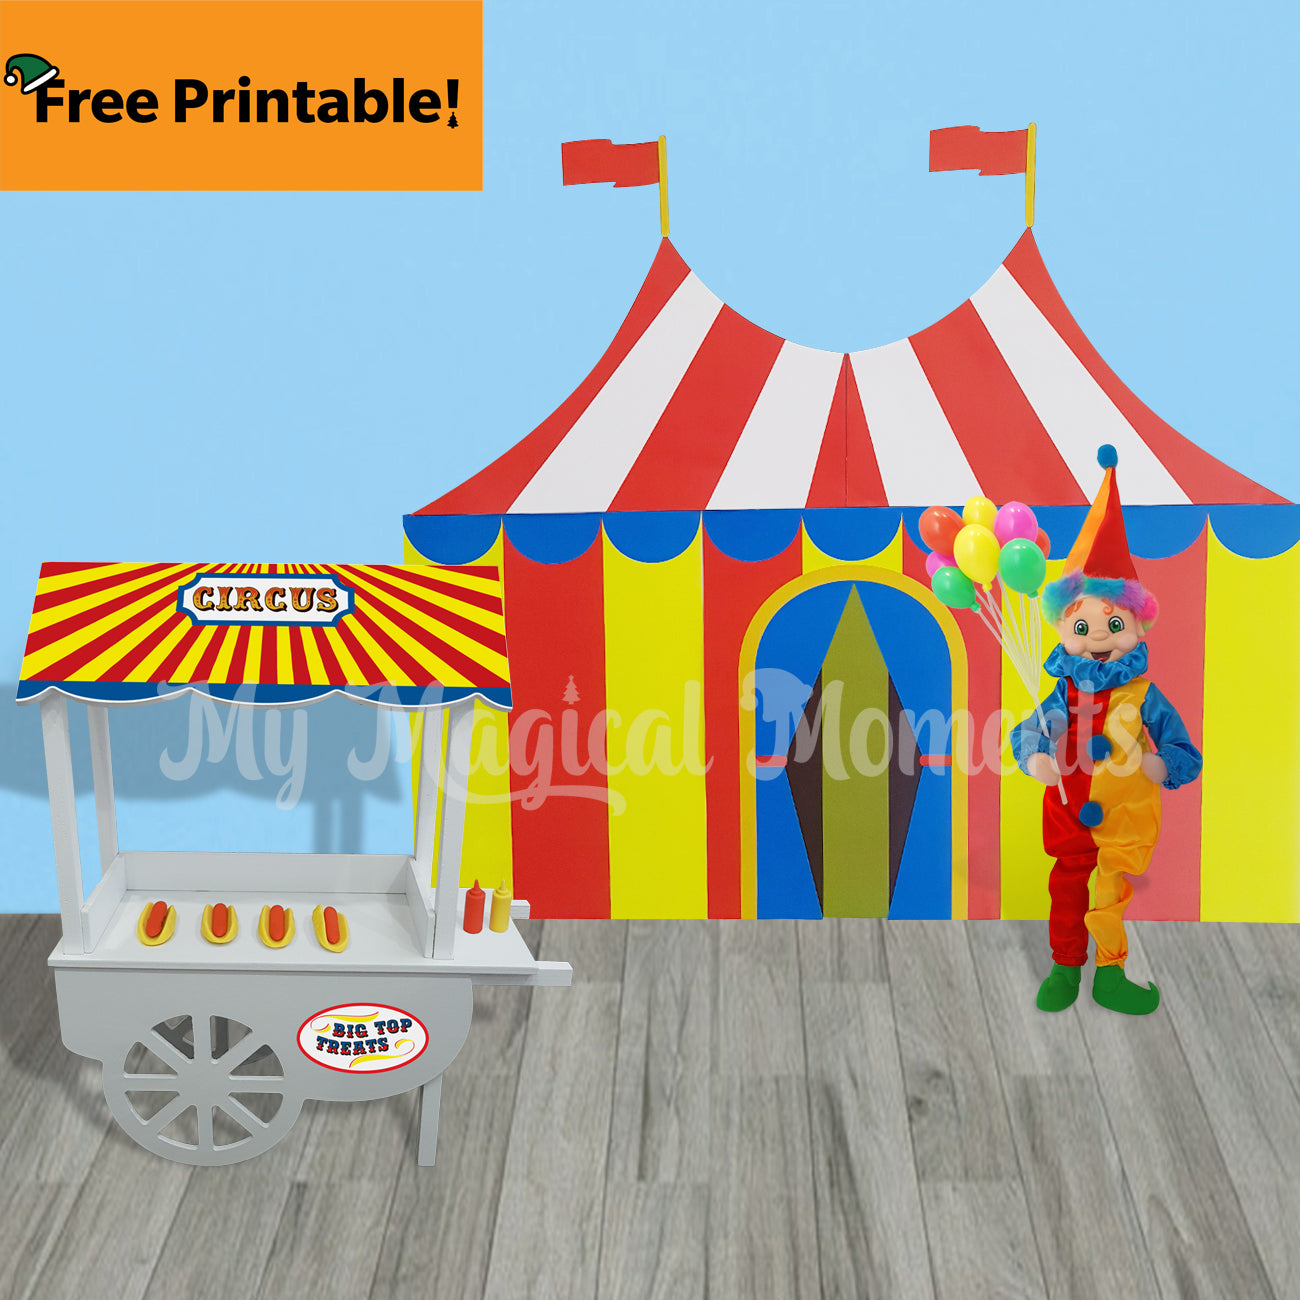 elf Circus clown in front of a big top tent printable and a hot dog stand holding balloons